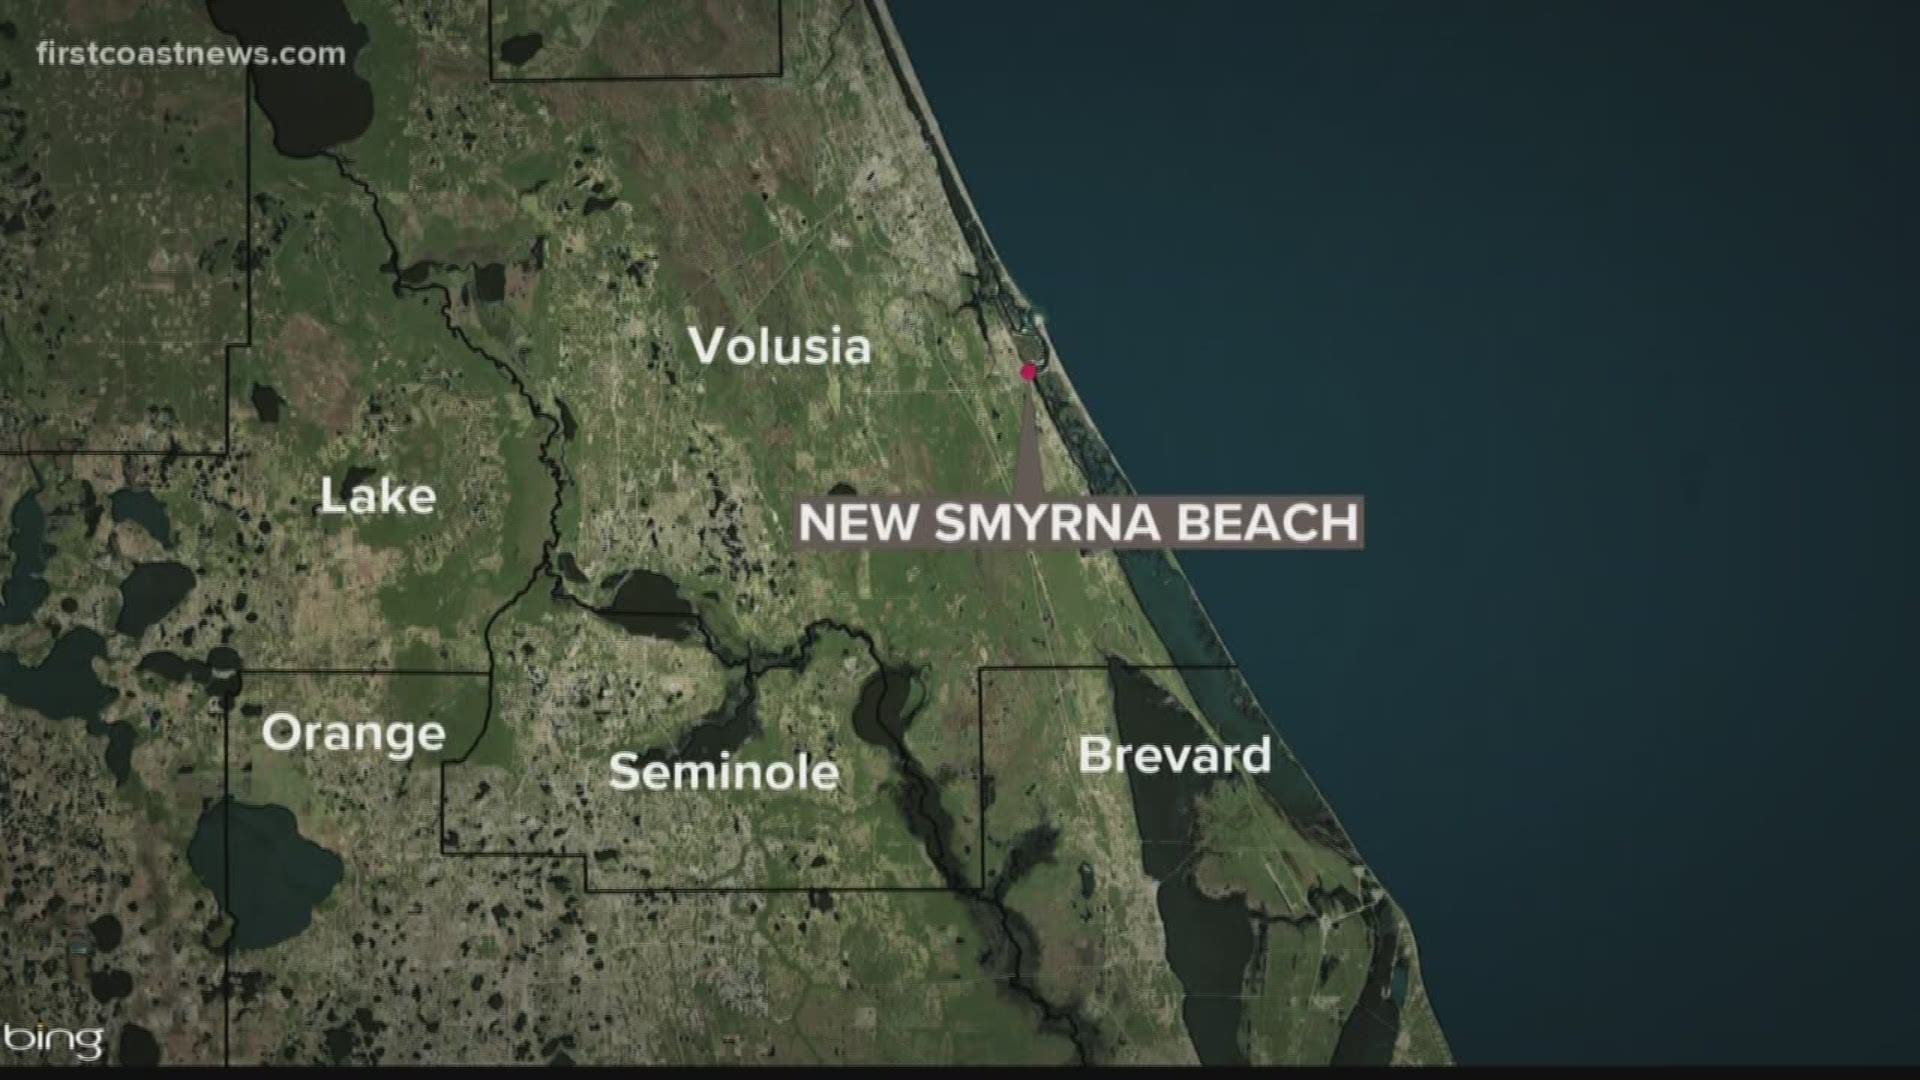 The bite is the 10th this year in Volusia County, the so-called “shark bite capital of the world.”